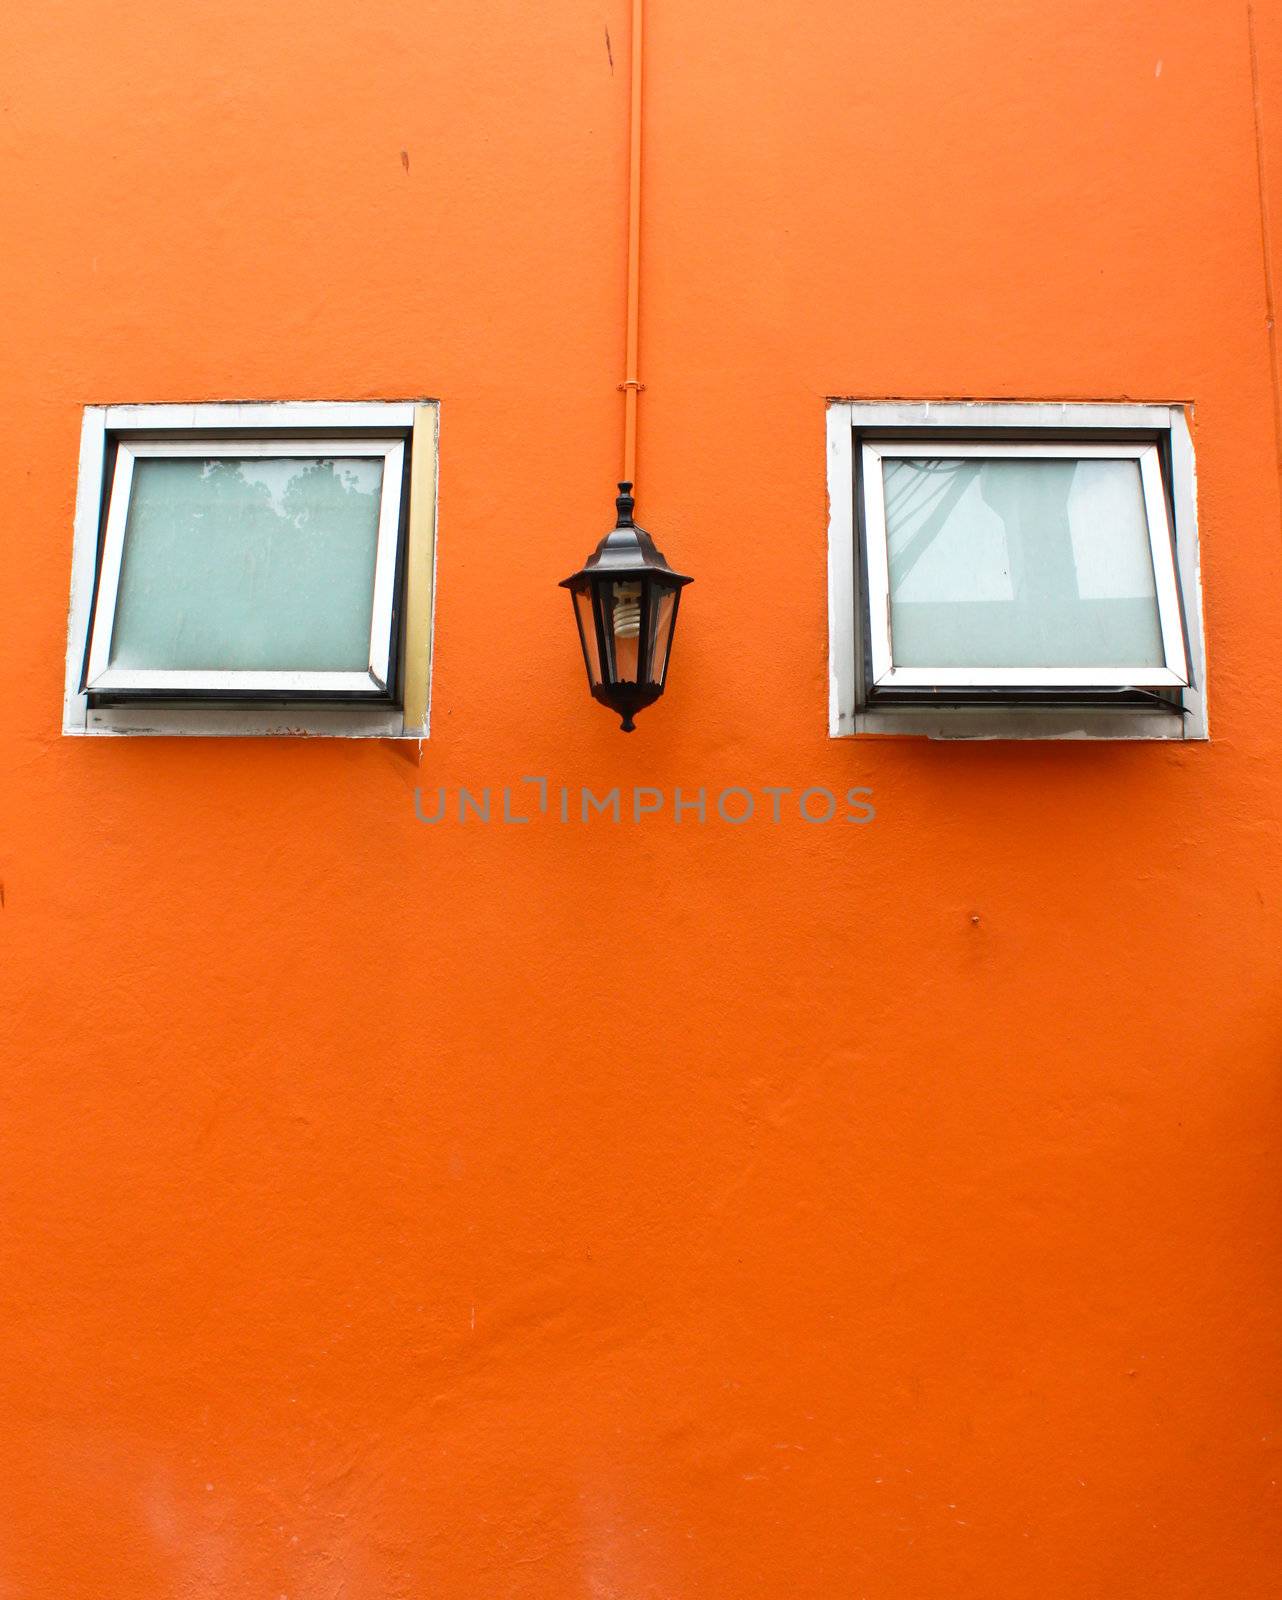 old lamp with windows on orange wall